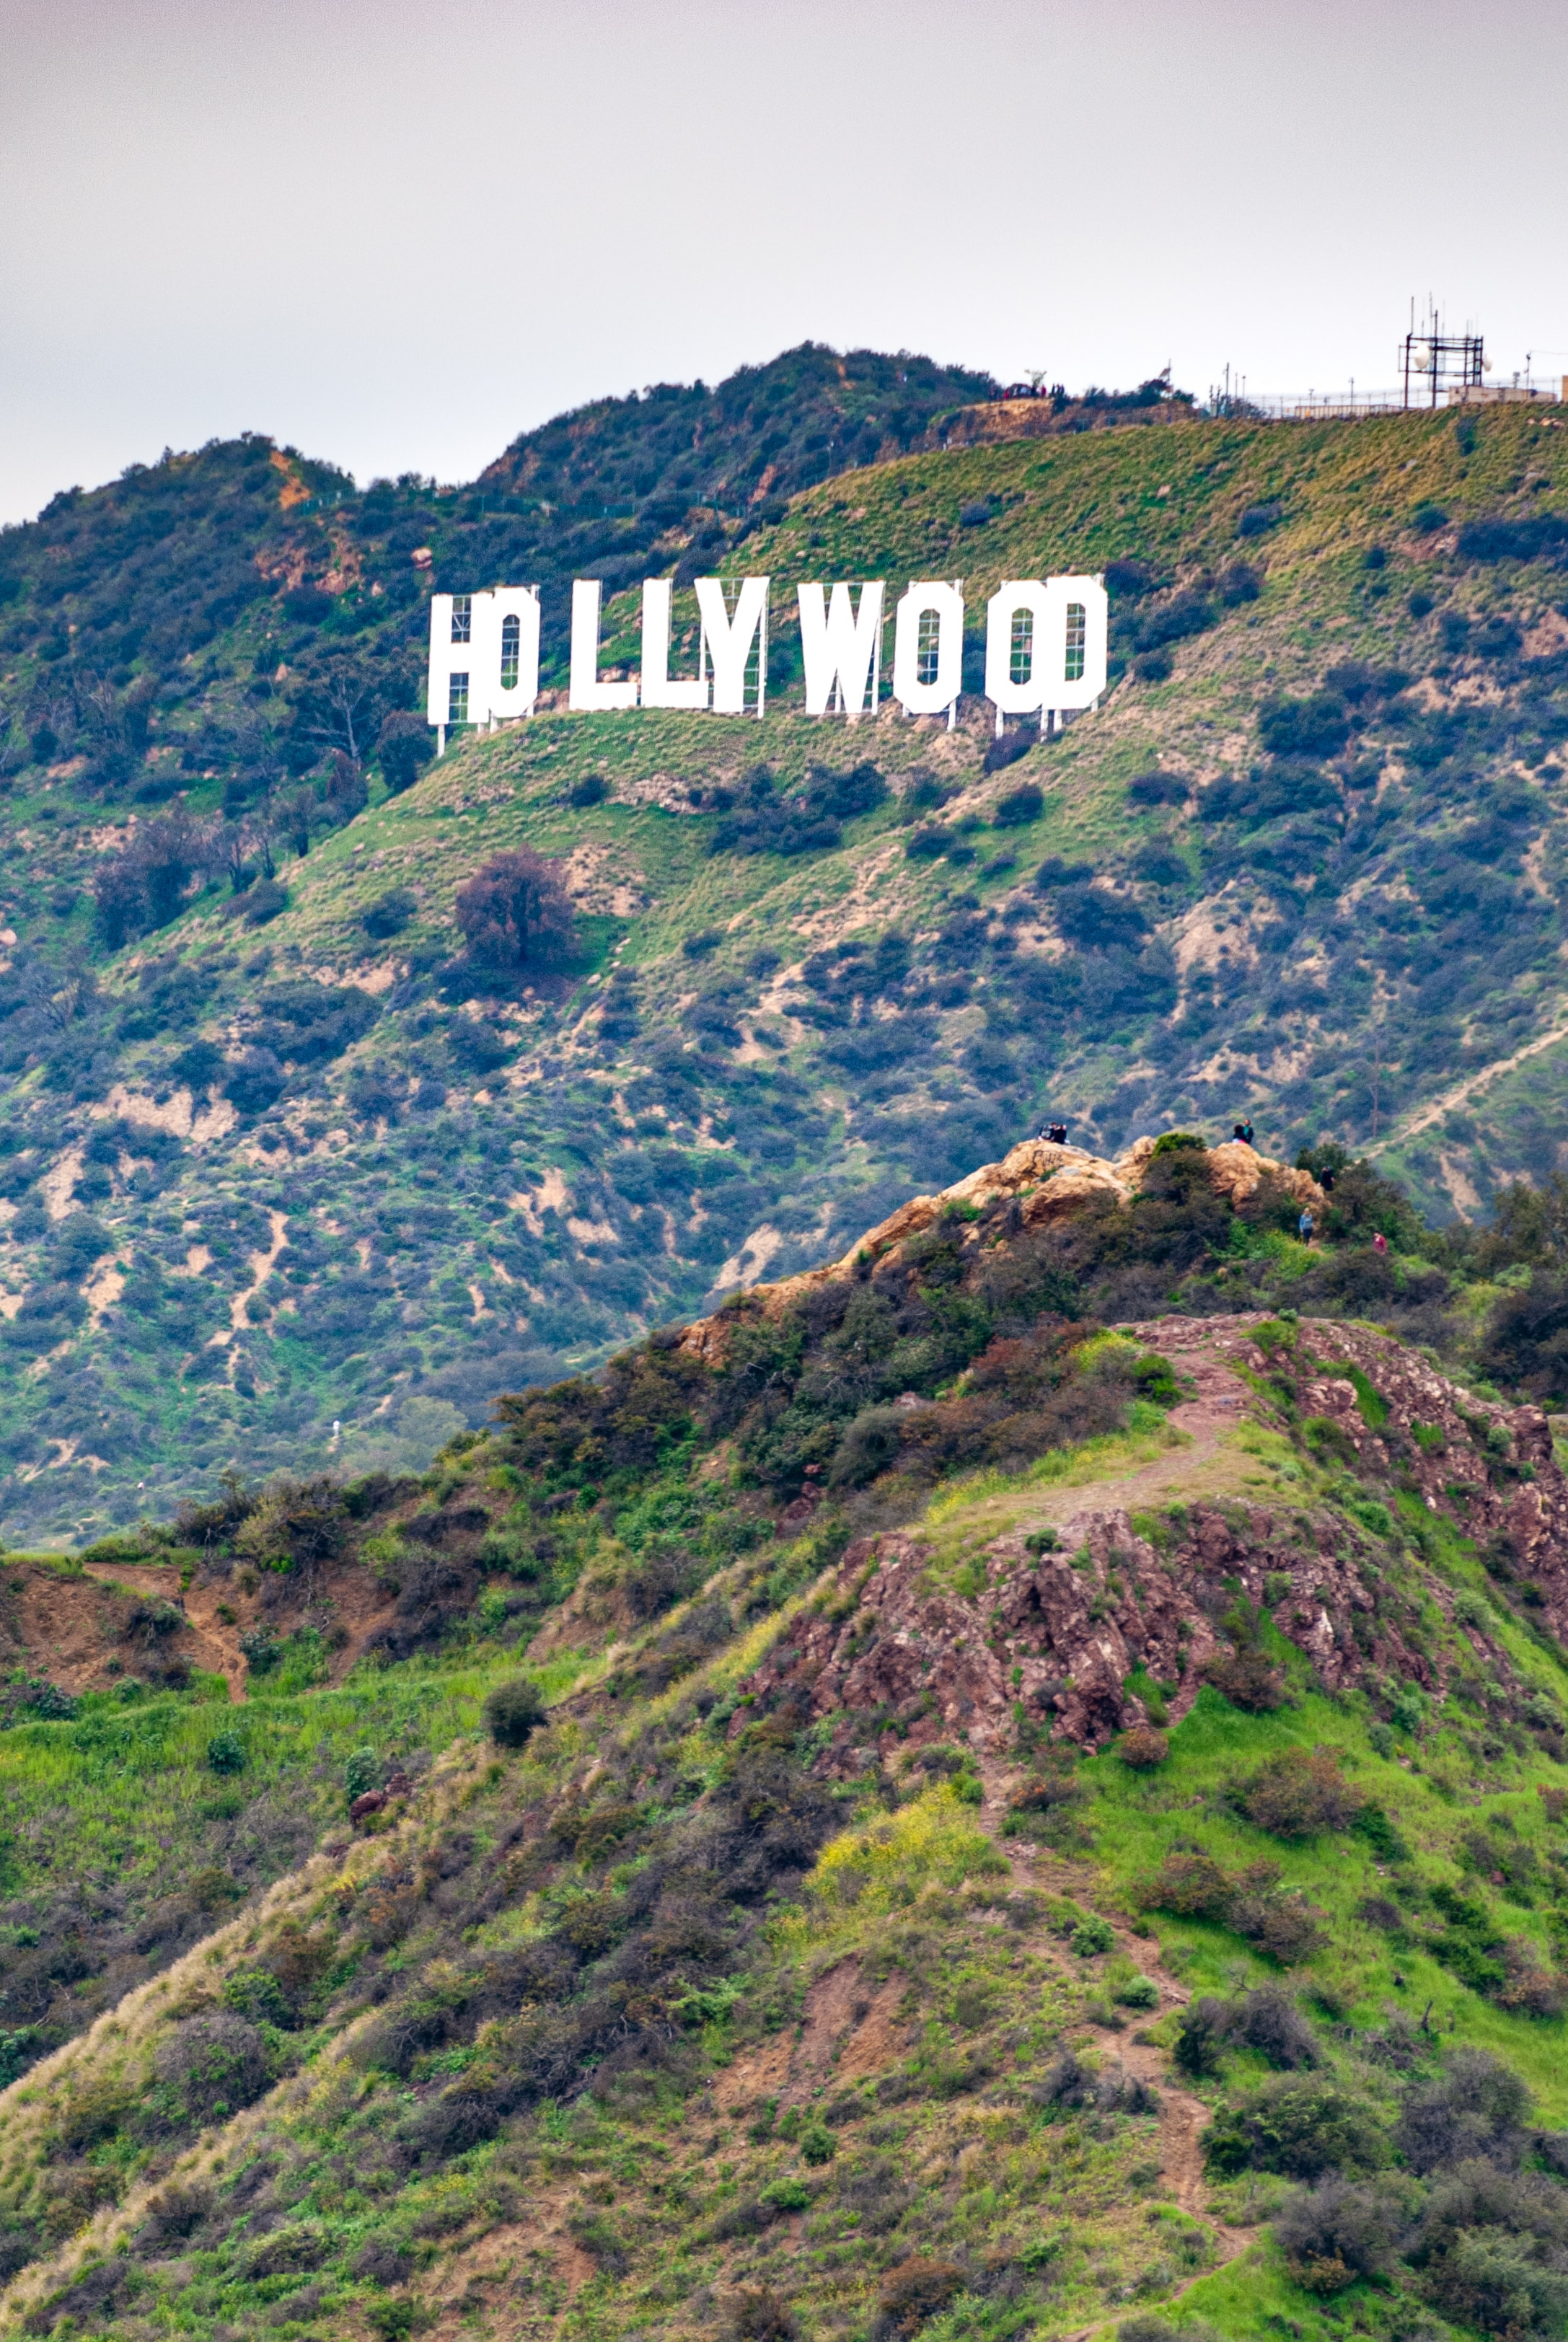 wallpapers hollywood, slope, word, rocks, words, inscription